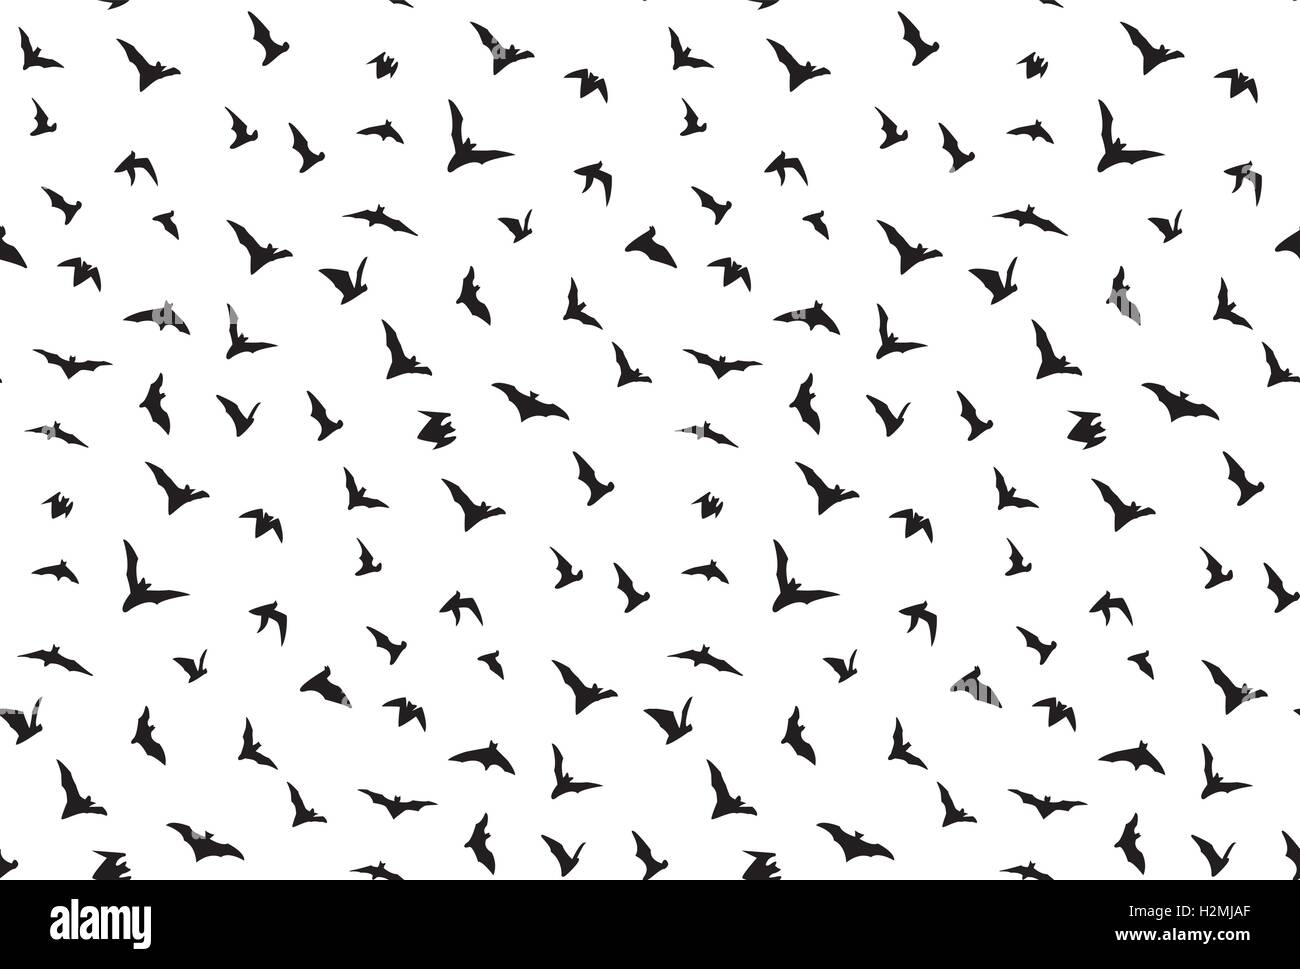 Isolated seamless flying bats pattern on white background Stock Vector